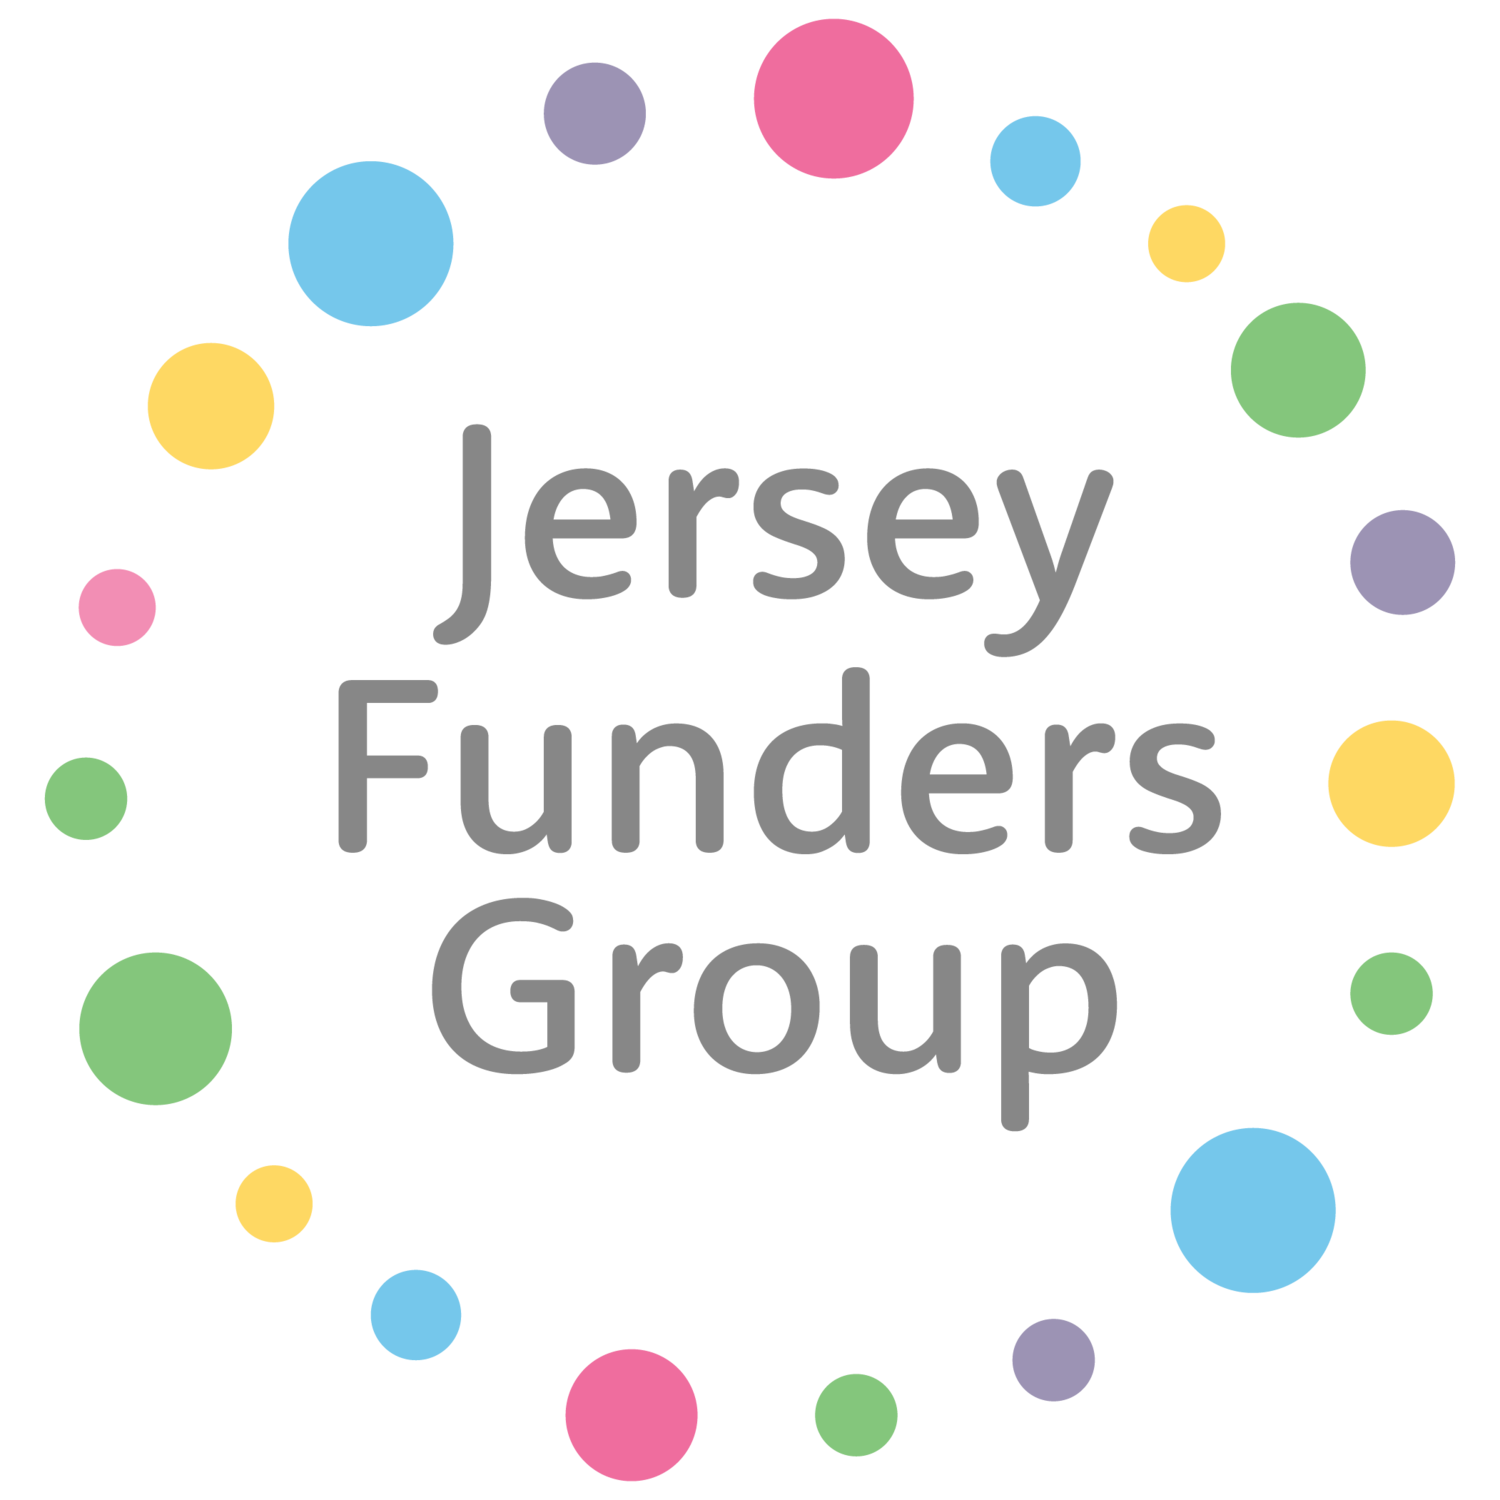 Jersey Funders Group